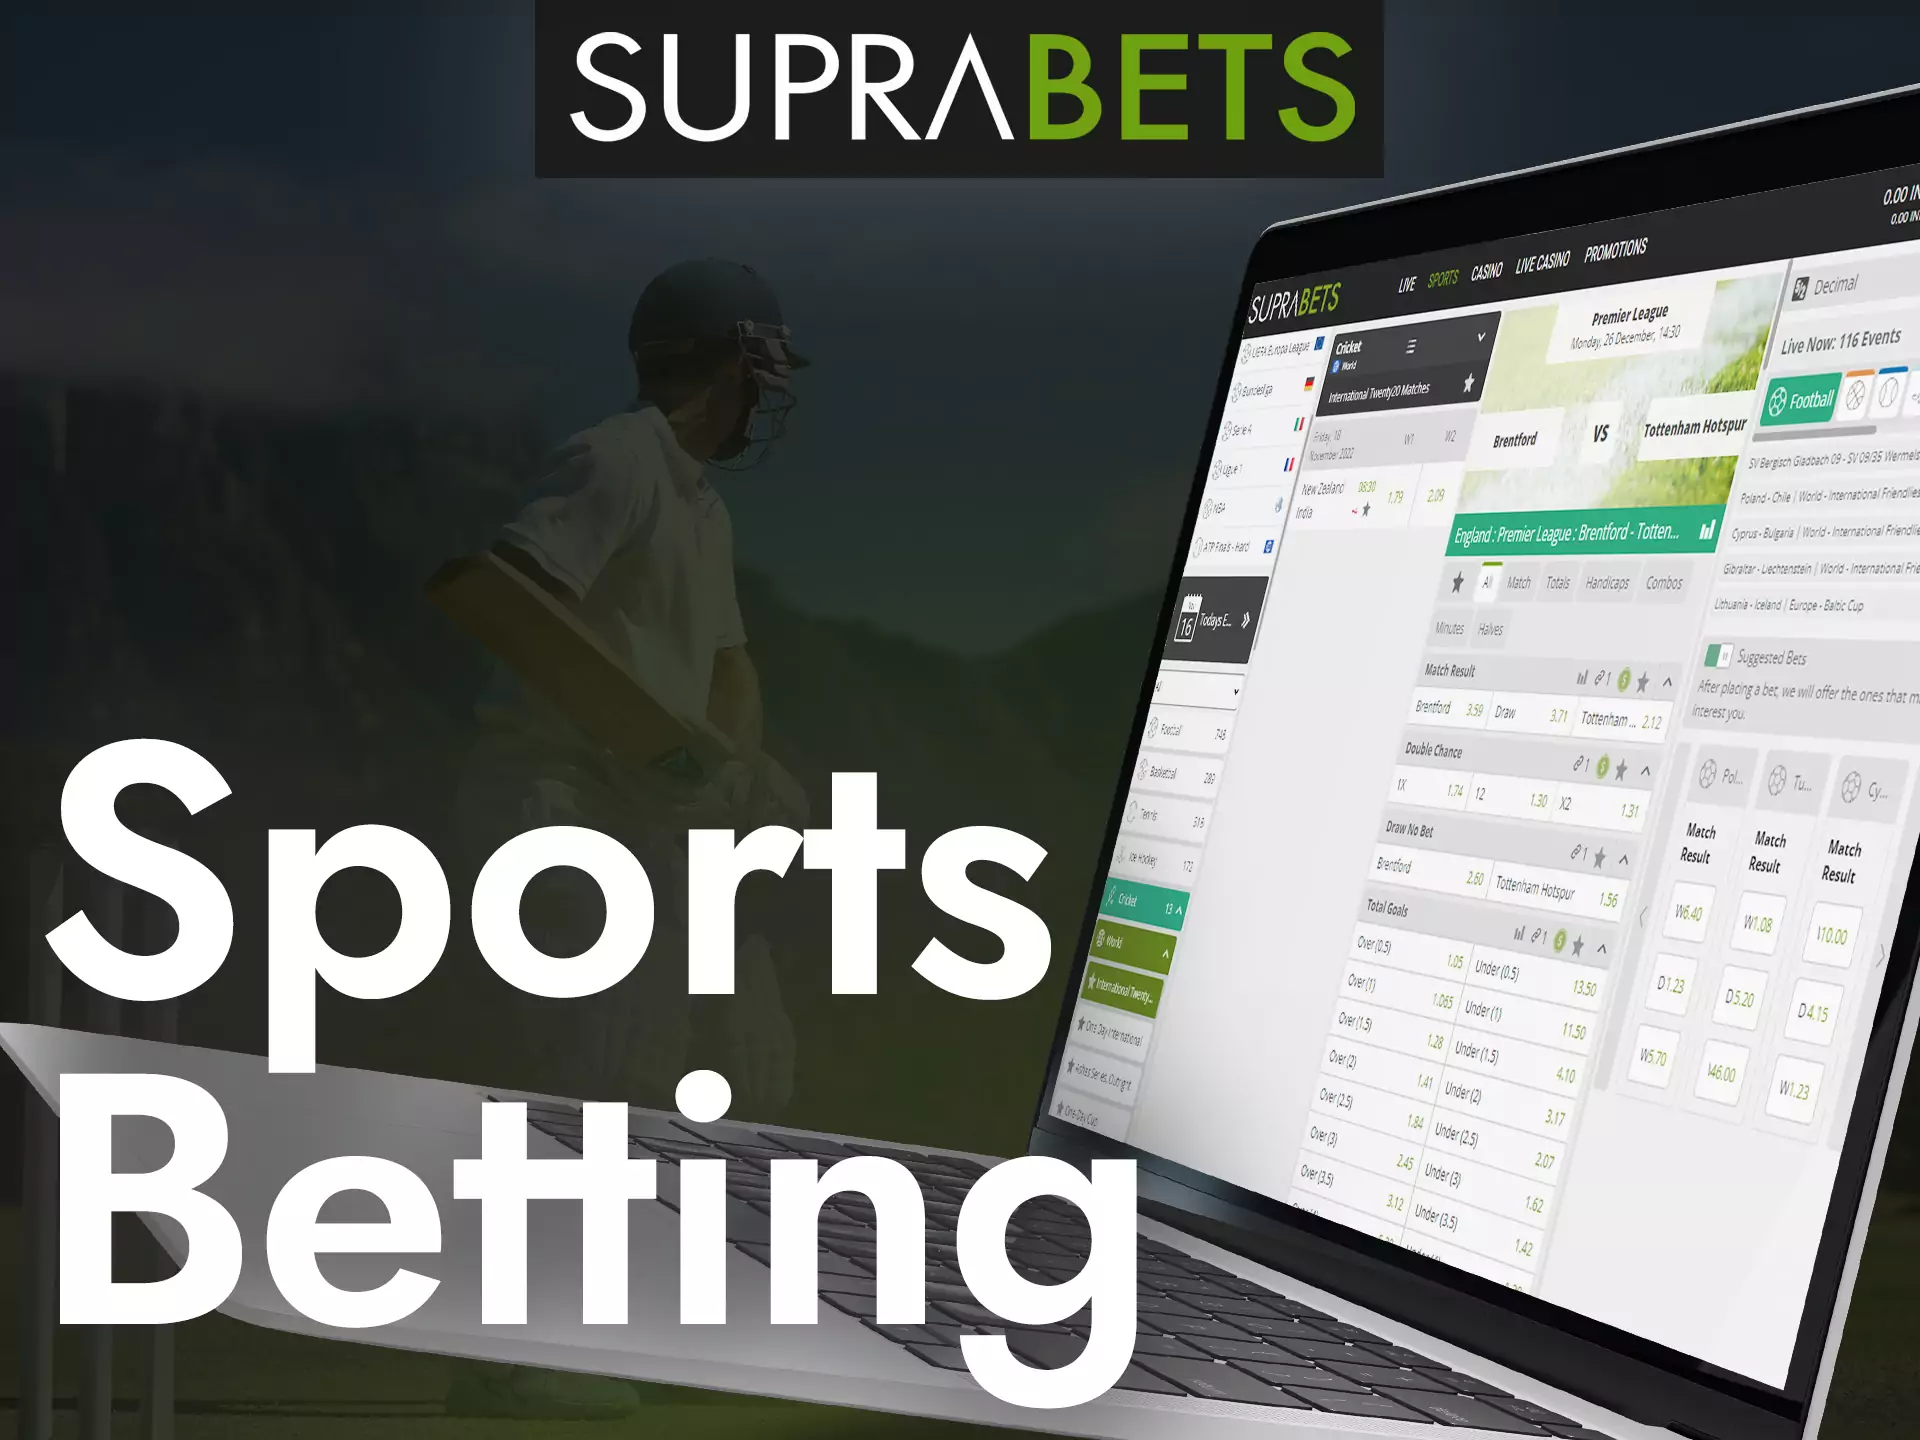 Place bets on all kinds of sports with Suprabets.